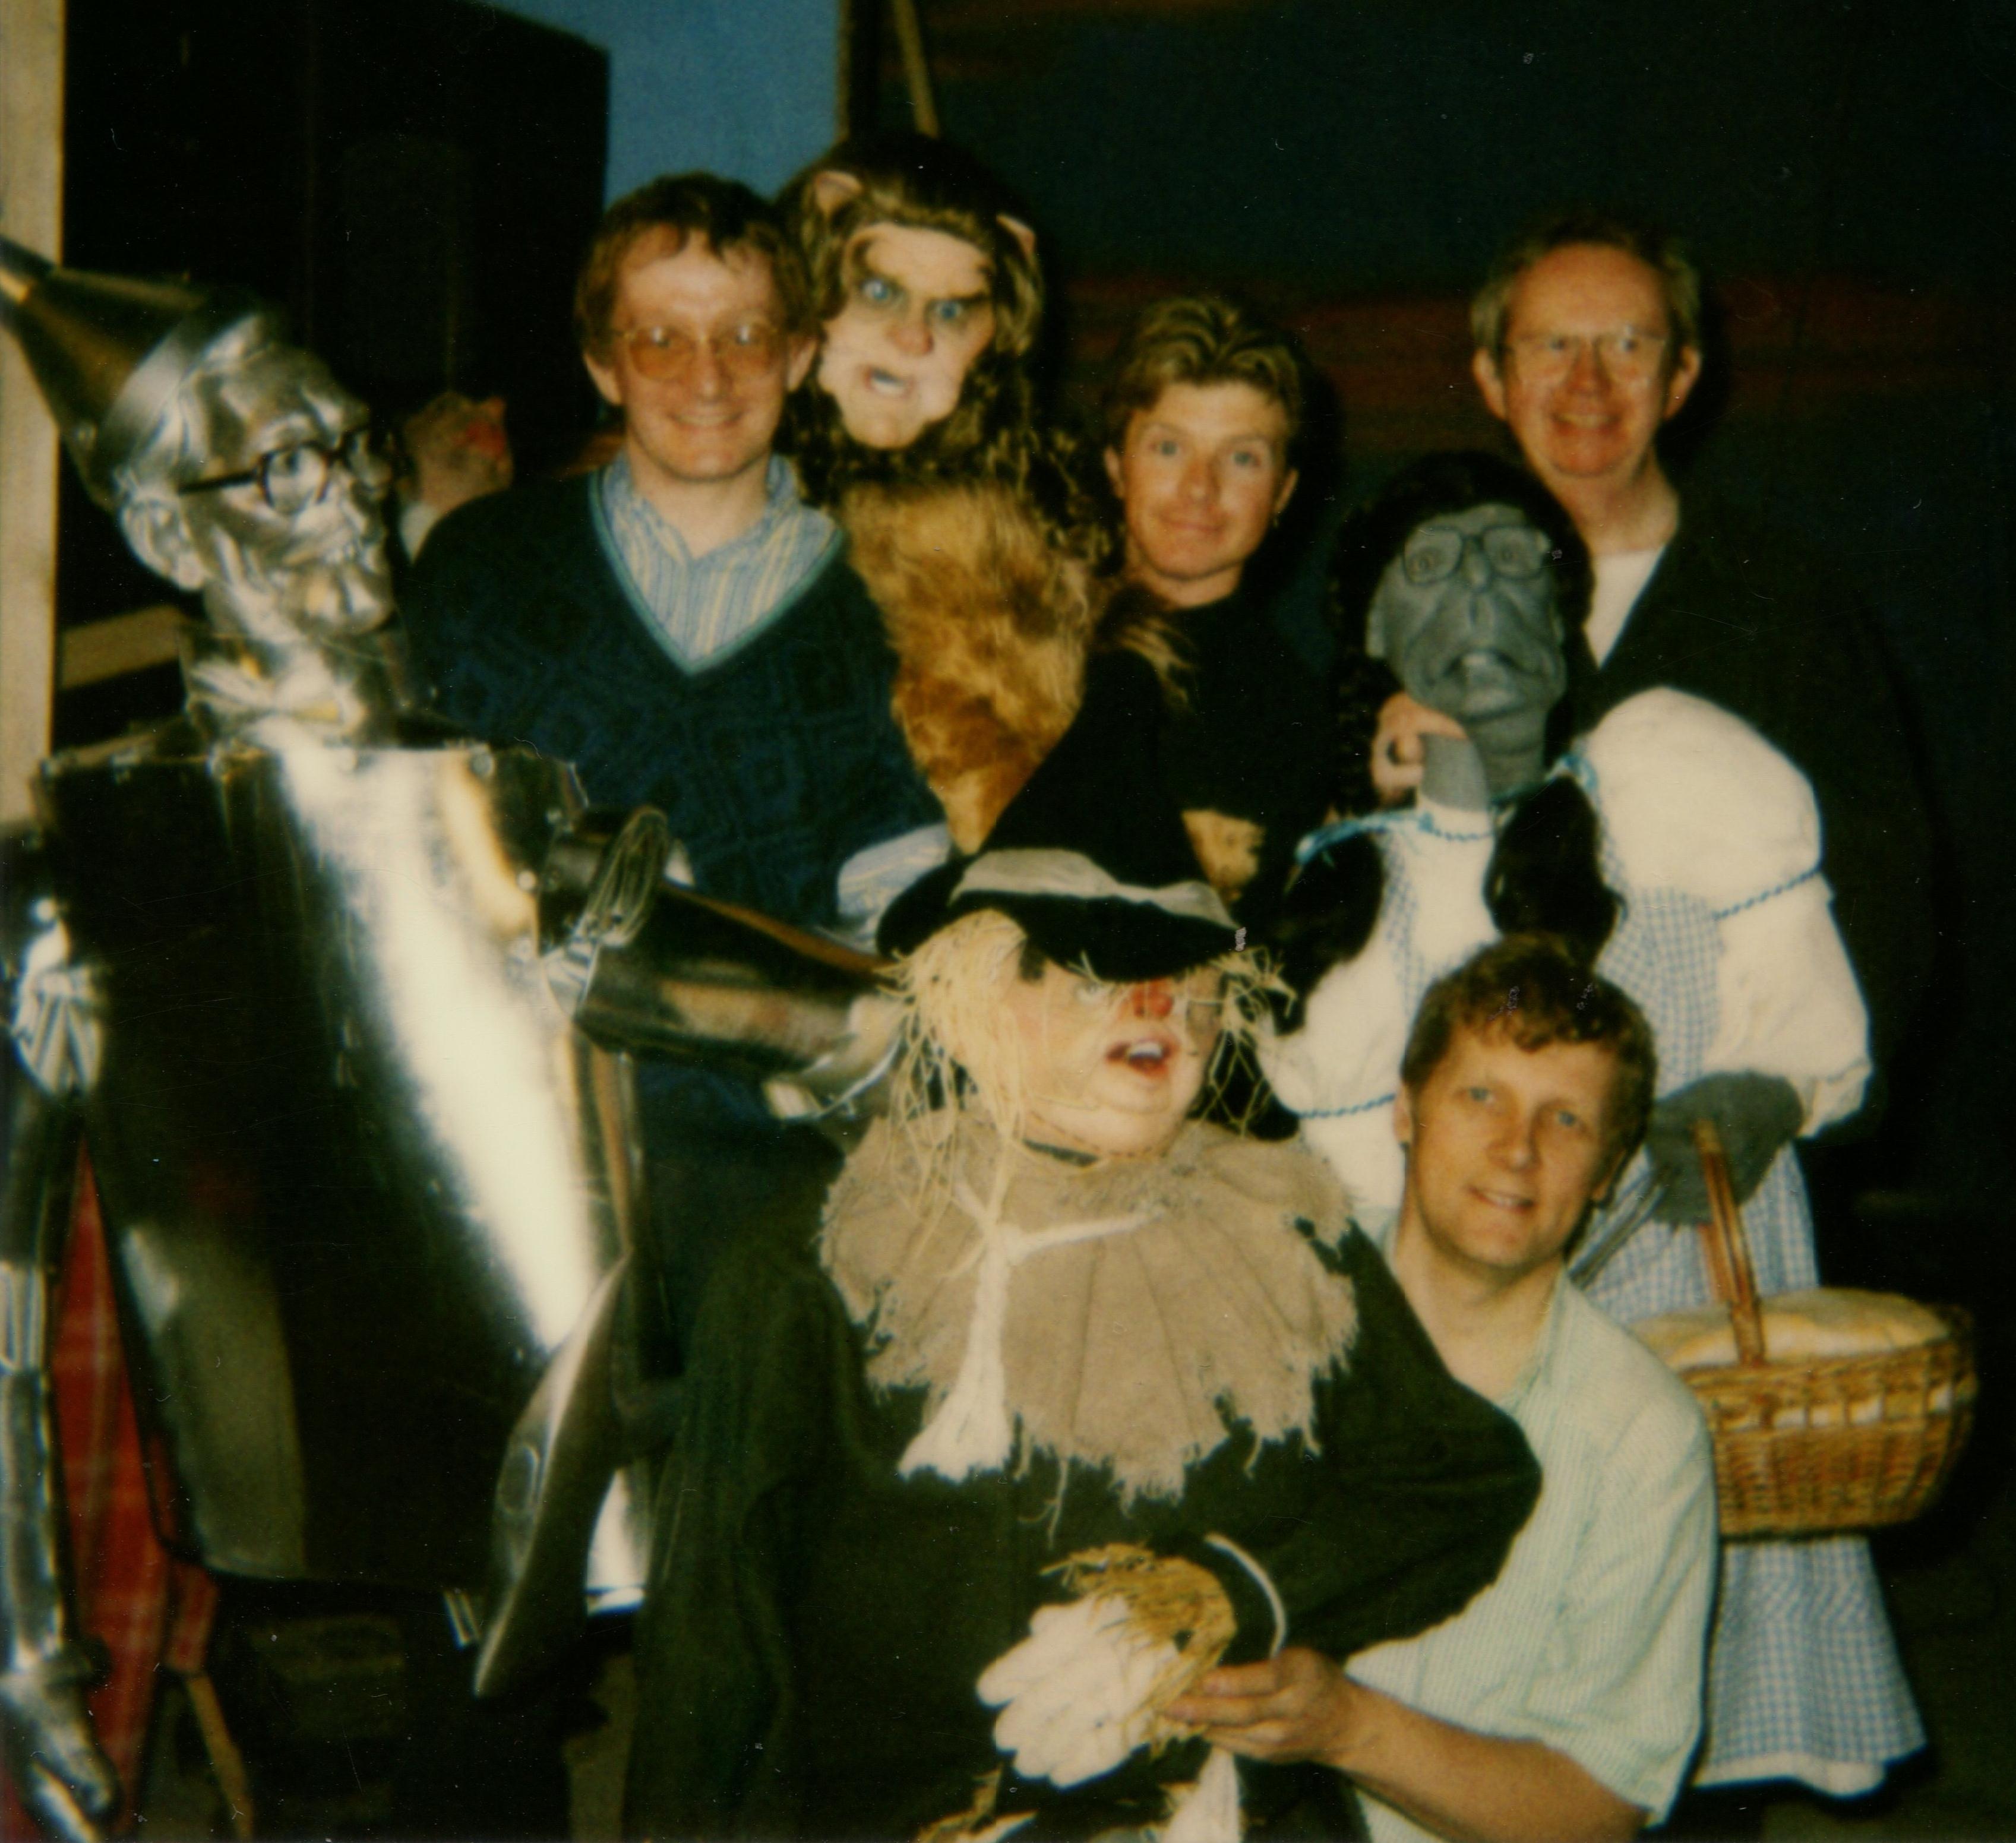 Steve Nallon, (left) with fellow puppeteers on set of TV series SPITTING IMAGE.